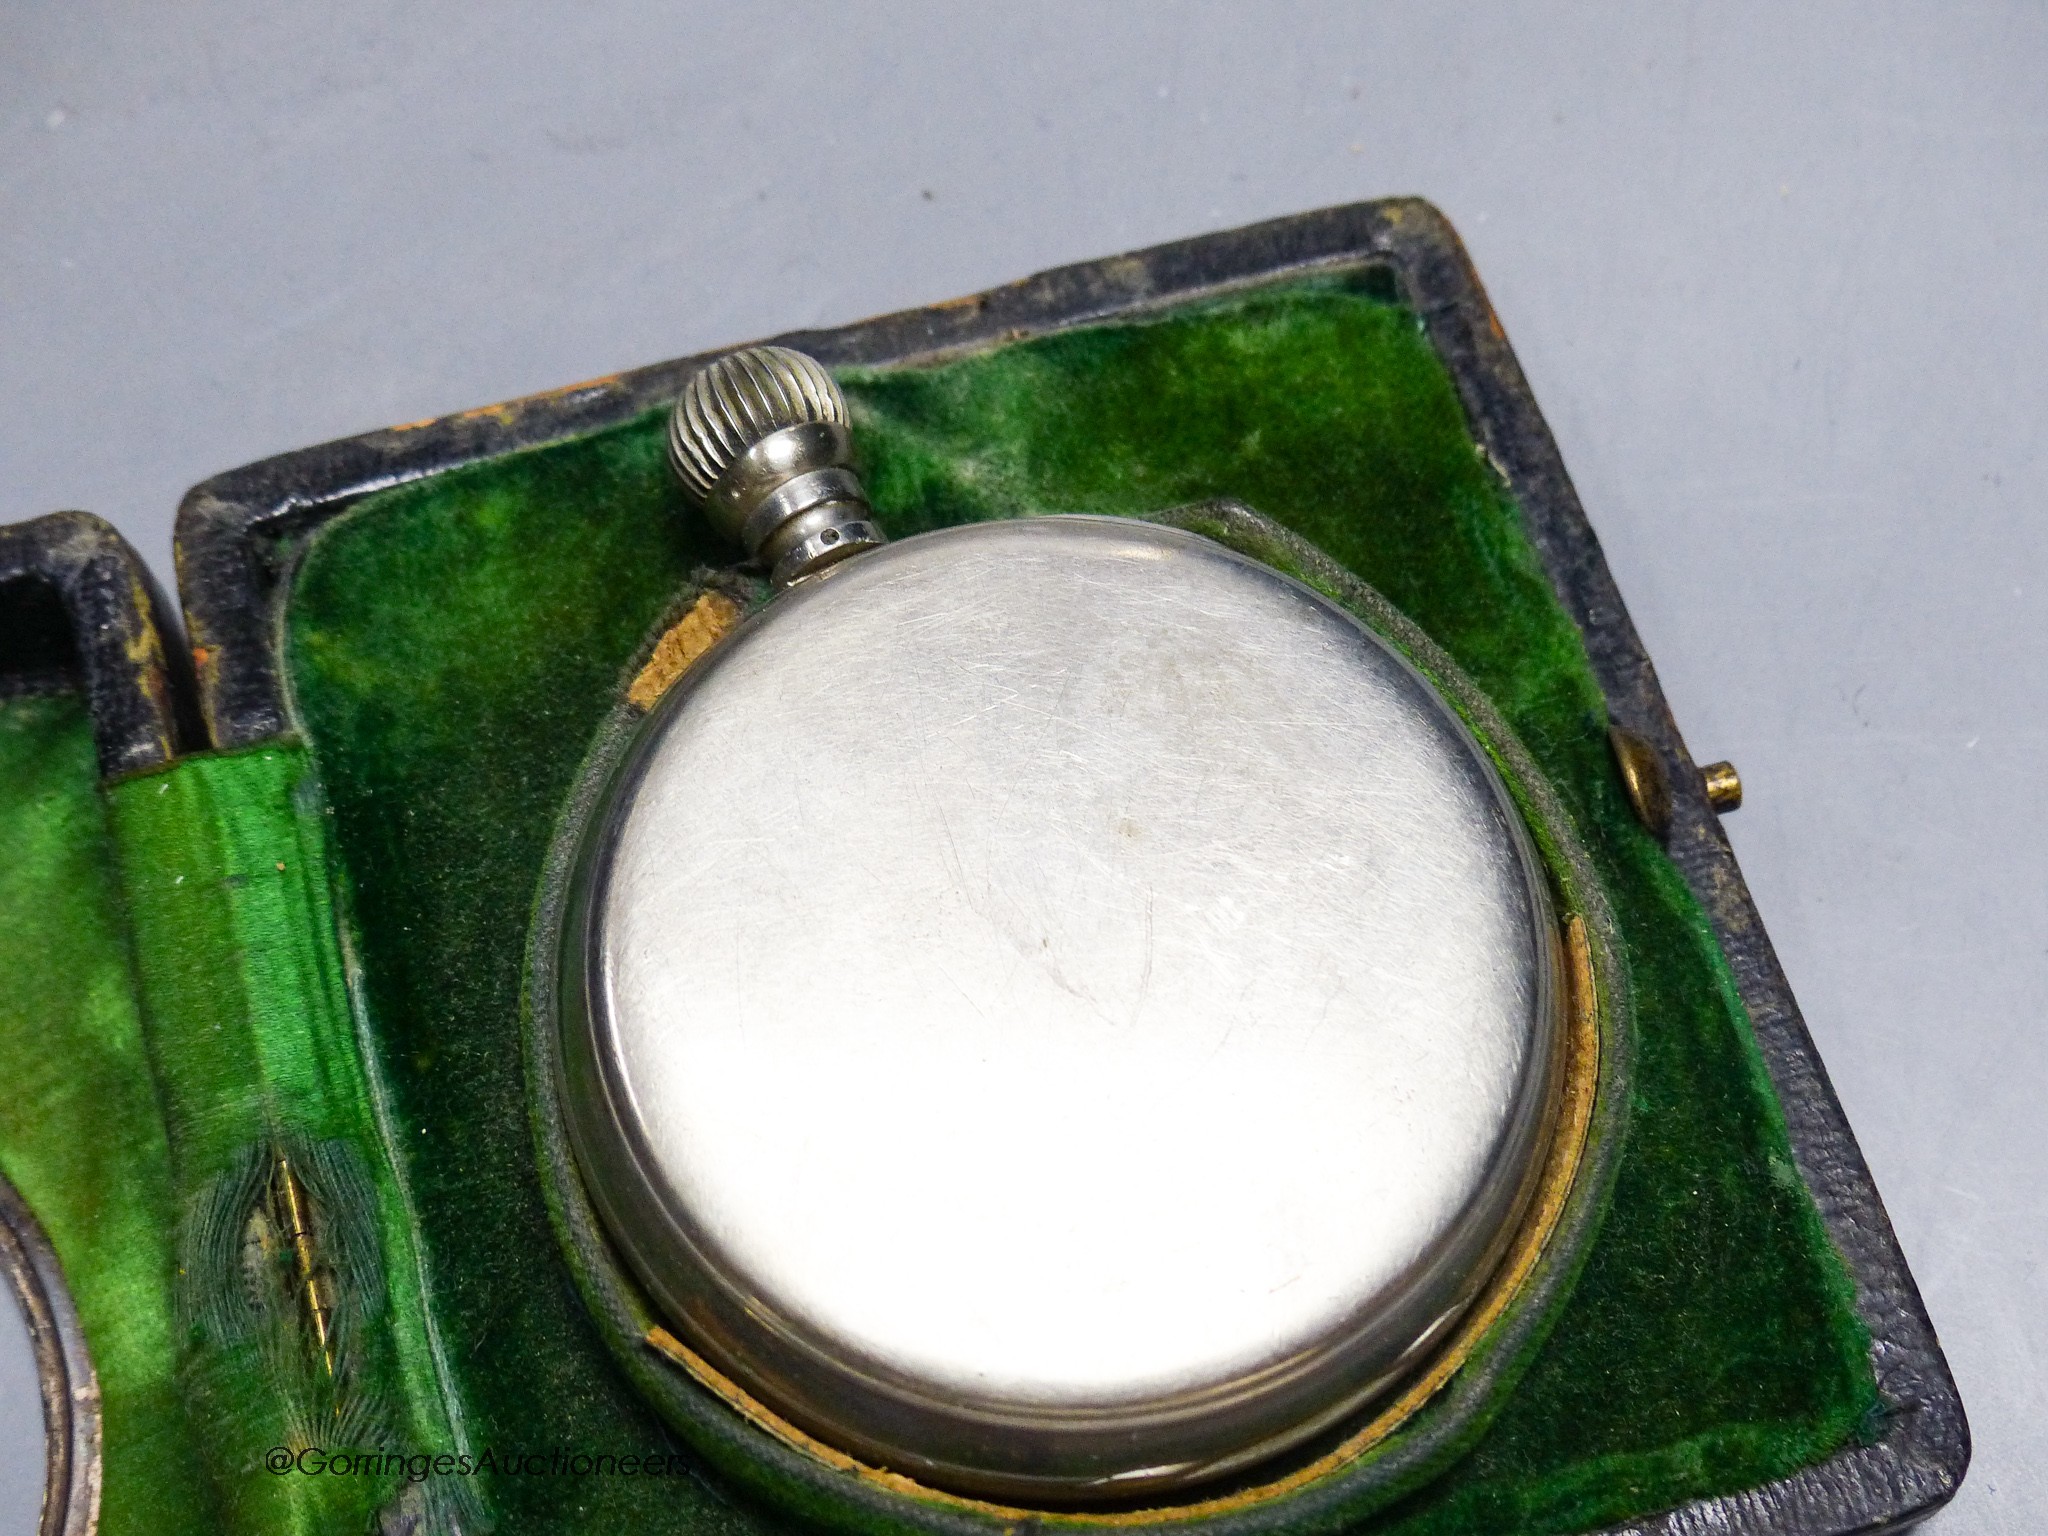 A cased carriage clock and a silver mounted motorwatch